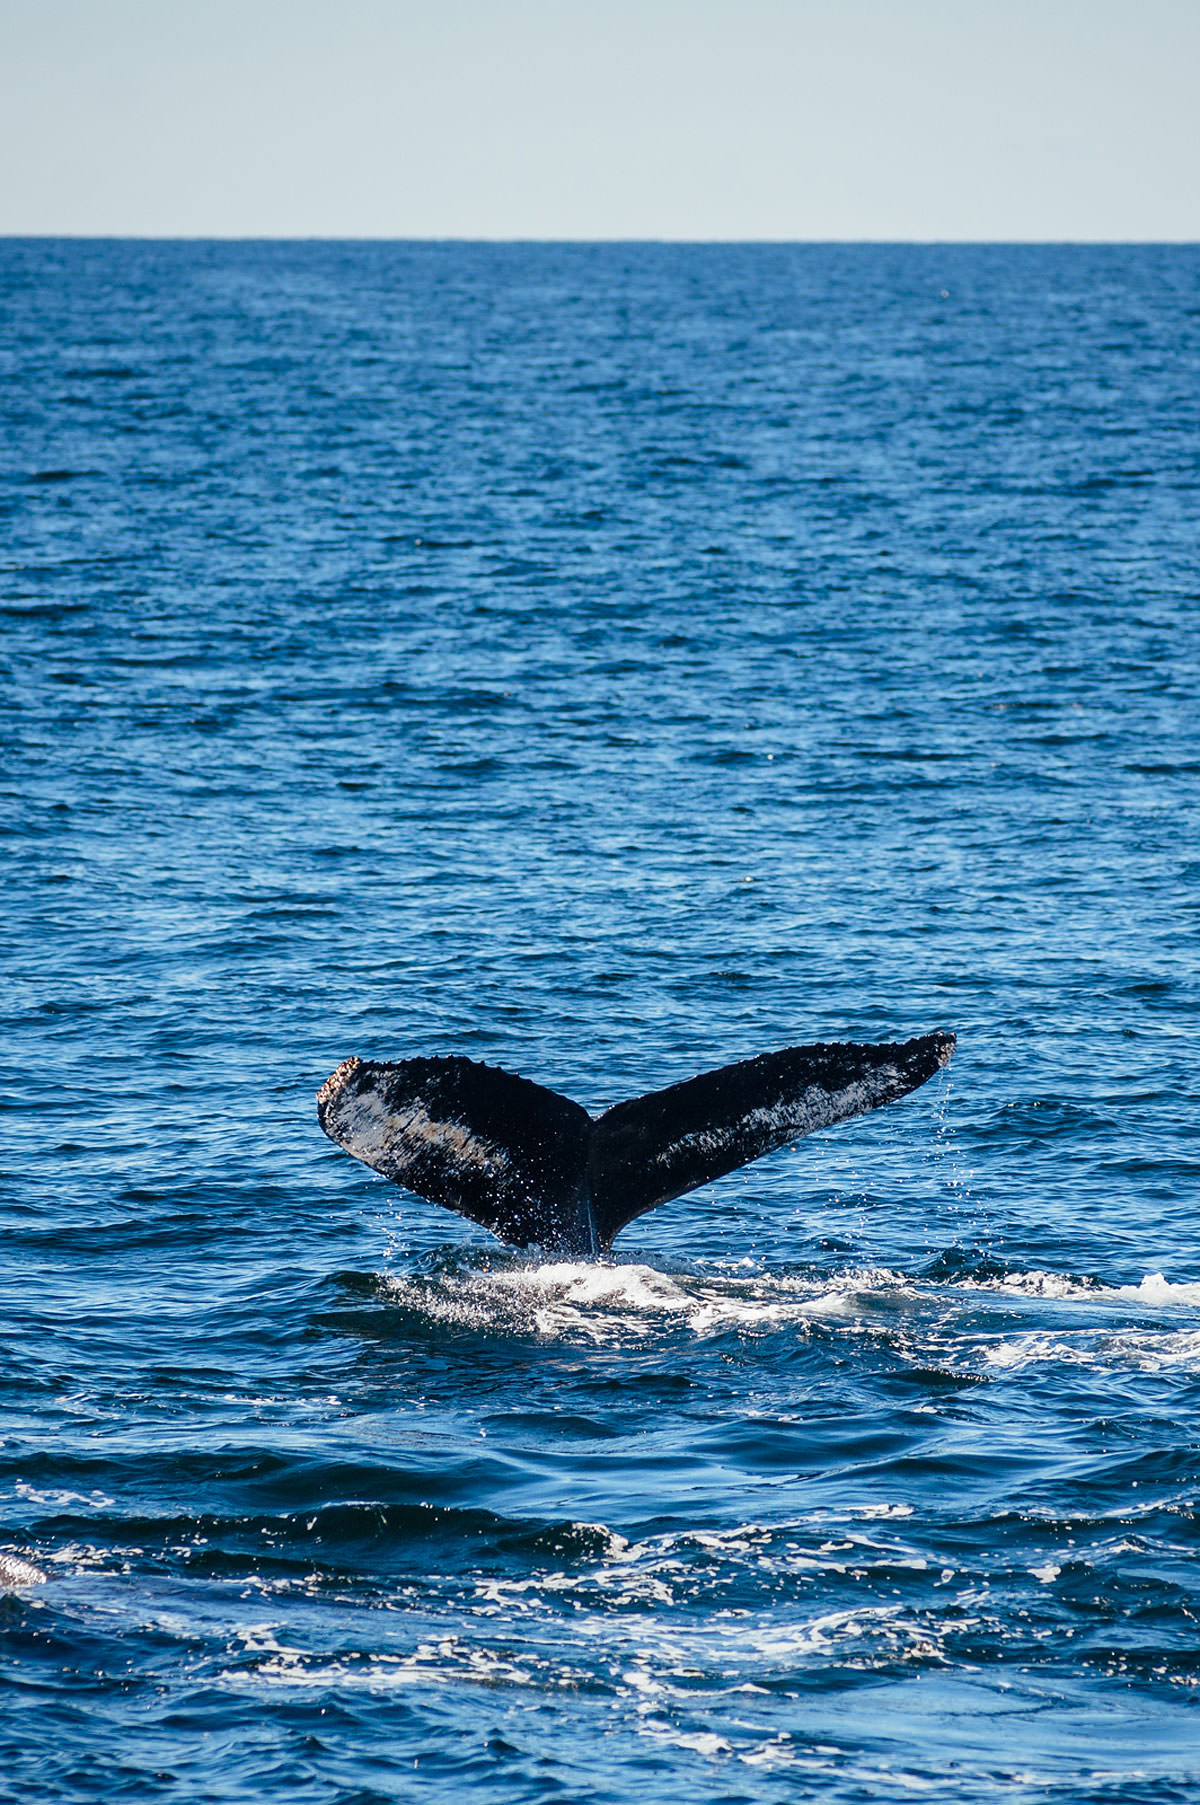 hyannis whale watching tour in september